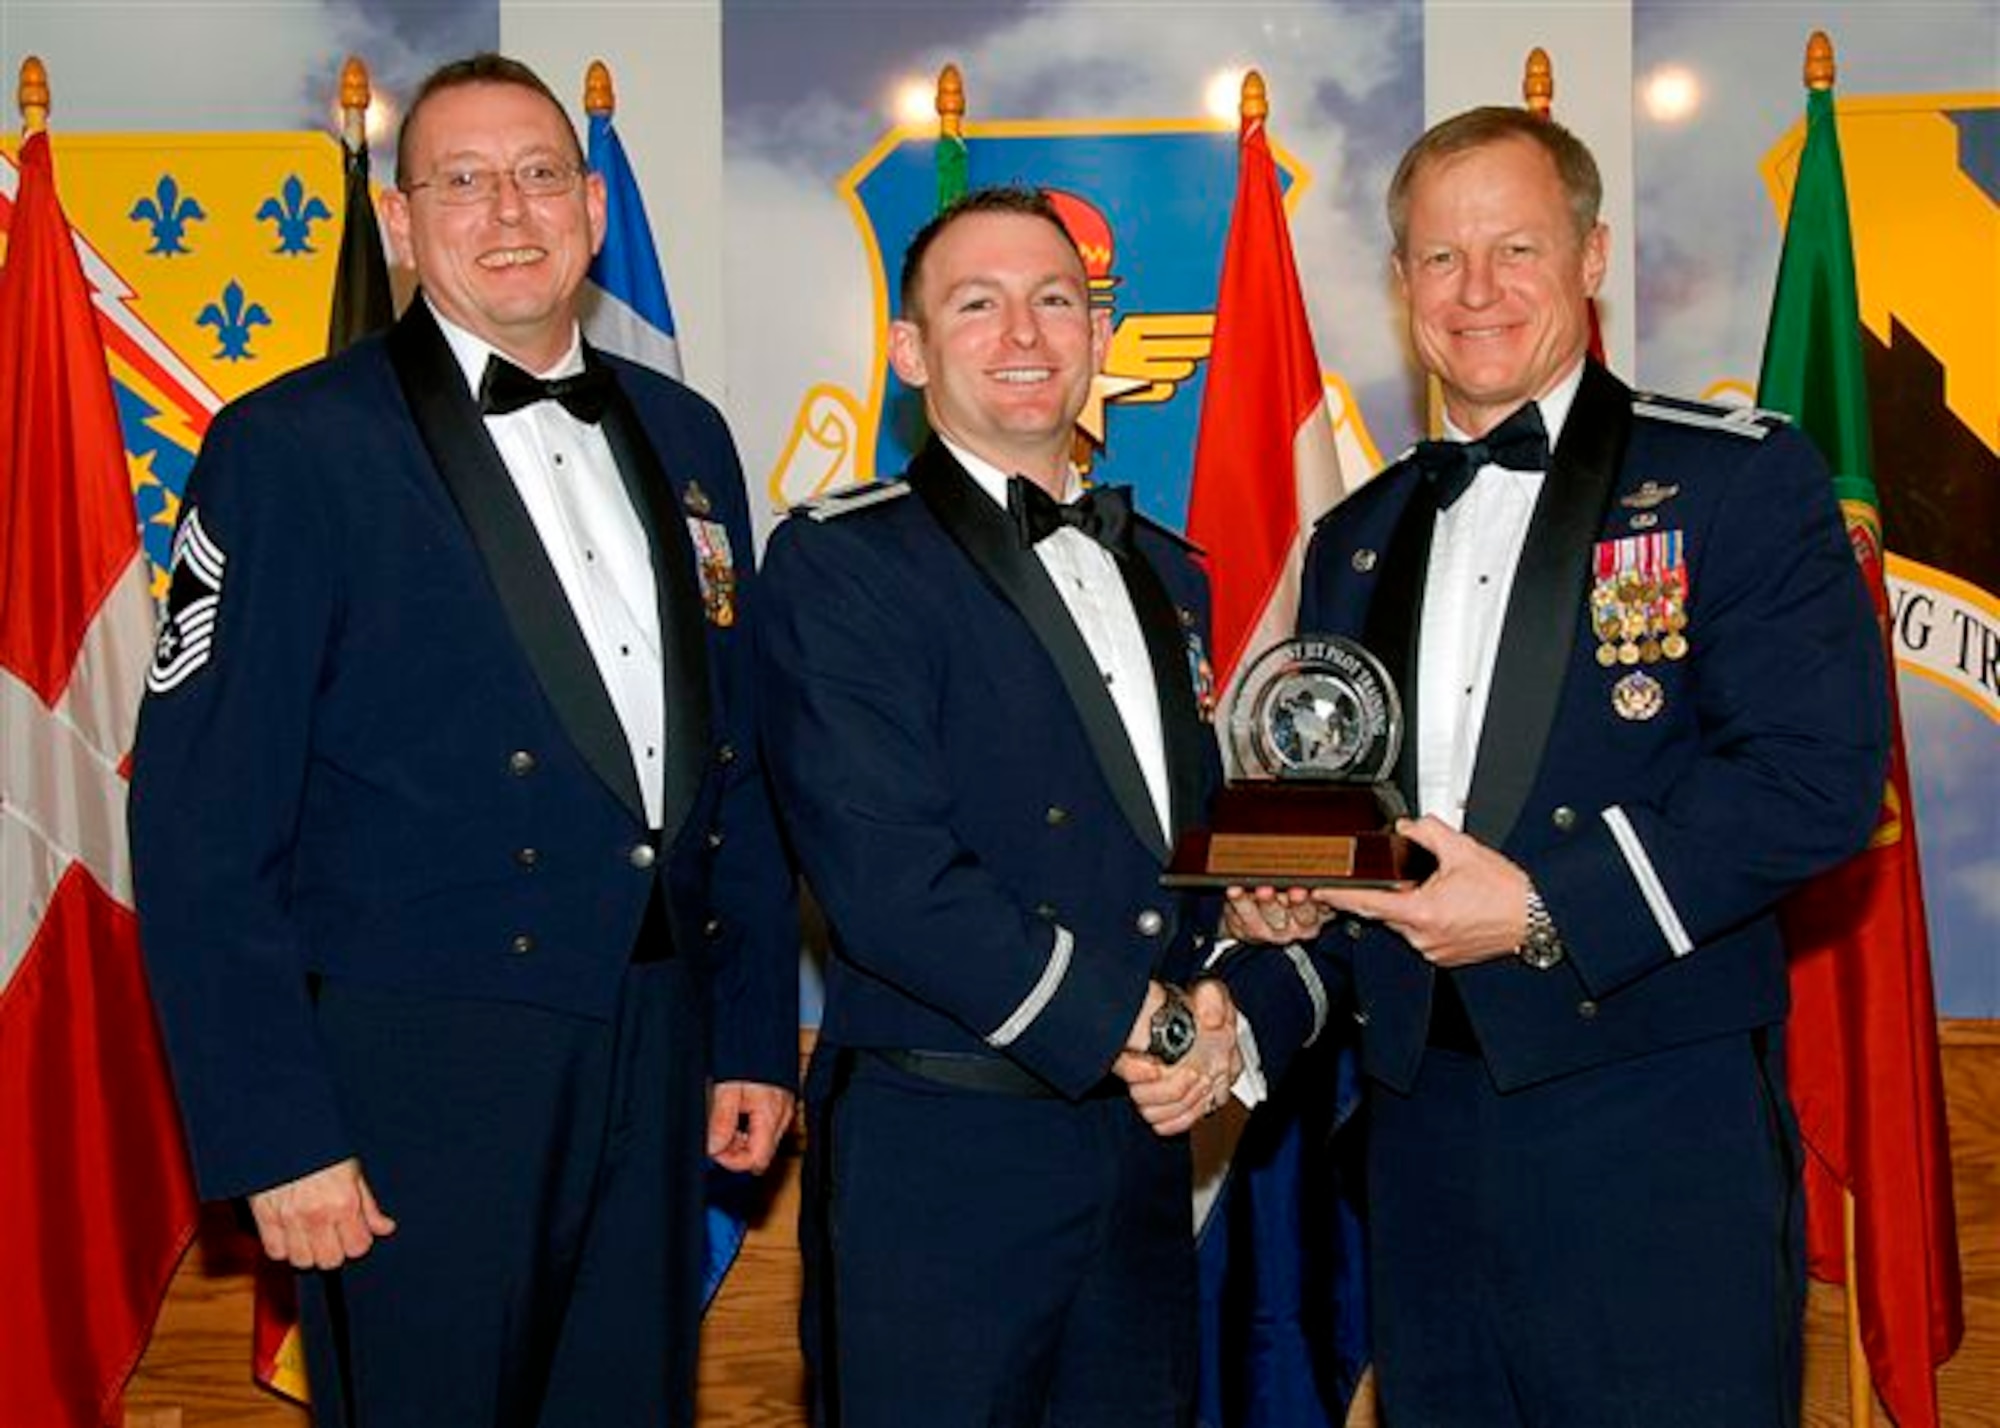 Capt. Brian Wood, center, accepts the award as the 80th Flying Training Wing's 2008 Senior Instructo Pilot of the Year. The 89th Flying Training Squadron captain was recognized for creating the Euro NATO Joint Jet Pilot Training T-6 pilot instructor training program from scratch. He implemented and executed two different training syllabi with 100 percent evaluation pass rate. Also pictured is Col. David Petersen, 80th FTW commander, and Chief Master Sgt. Norman Thierolf, the wing's command chief. (U.S. Air Force photo) 